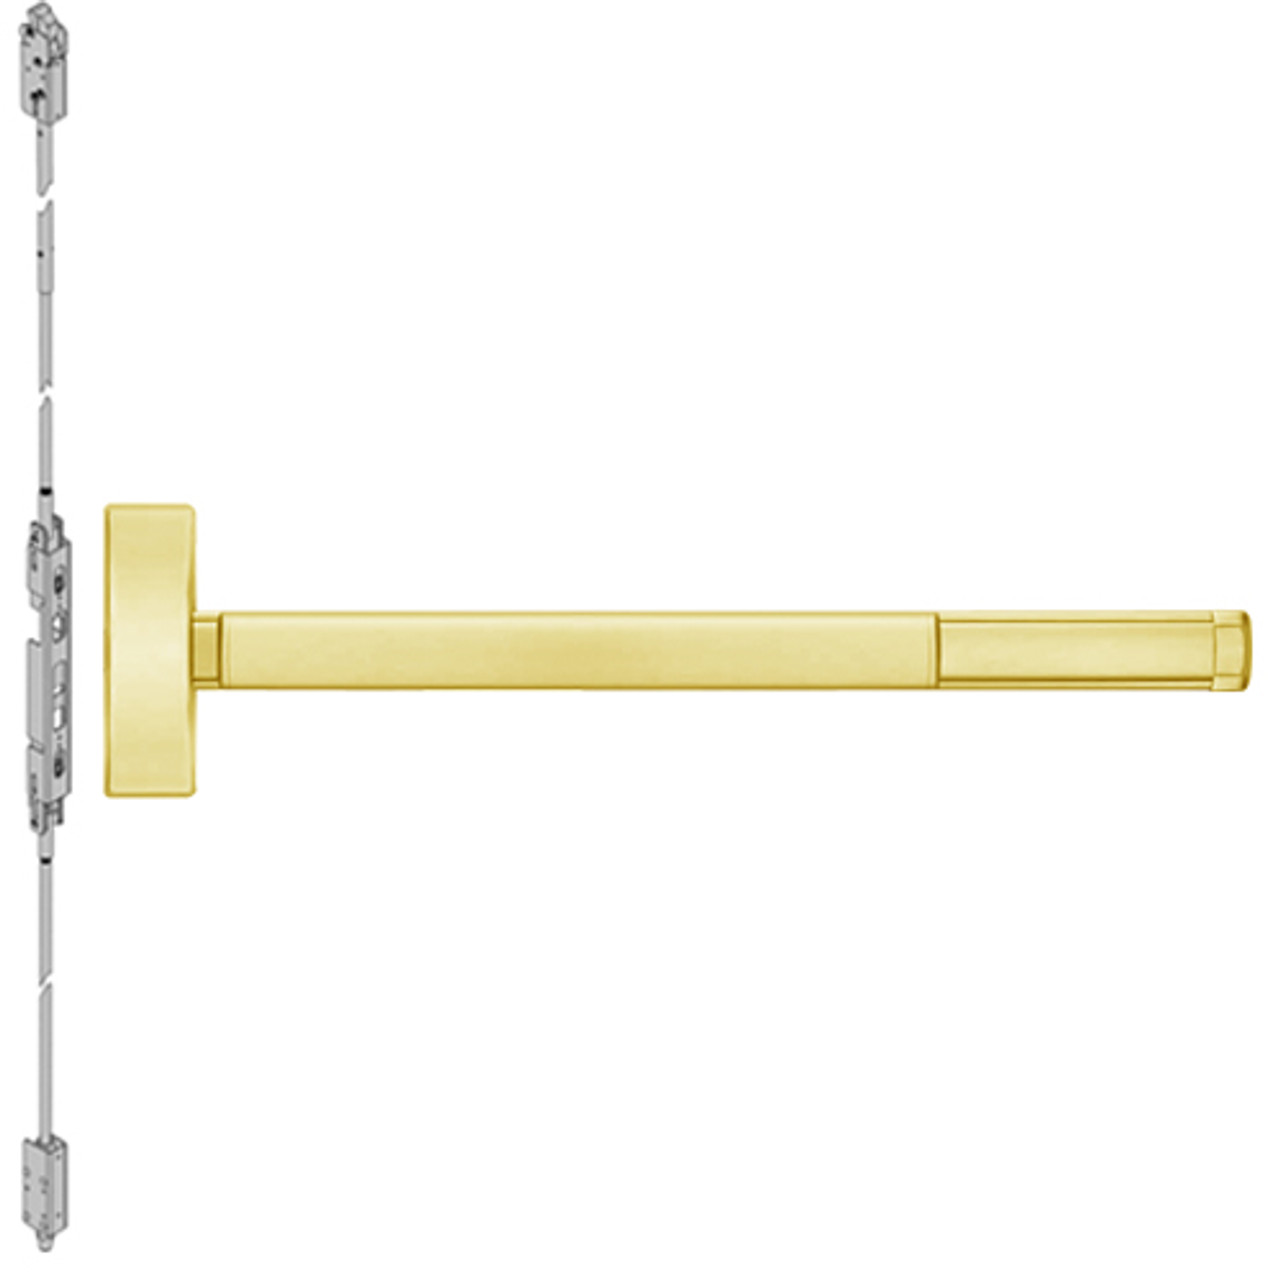 2805-605-36 PHI 2800 Series Non Fire Rated Concealed Vertical Rod Exit Device Prepped for Key Controls Thumb Piece in Bright Brass Finish